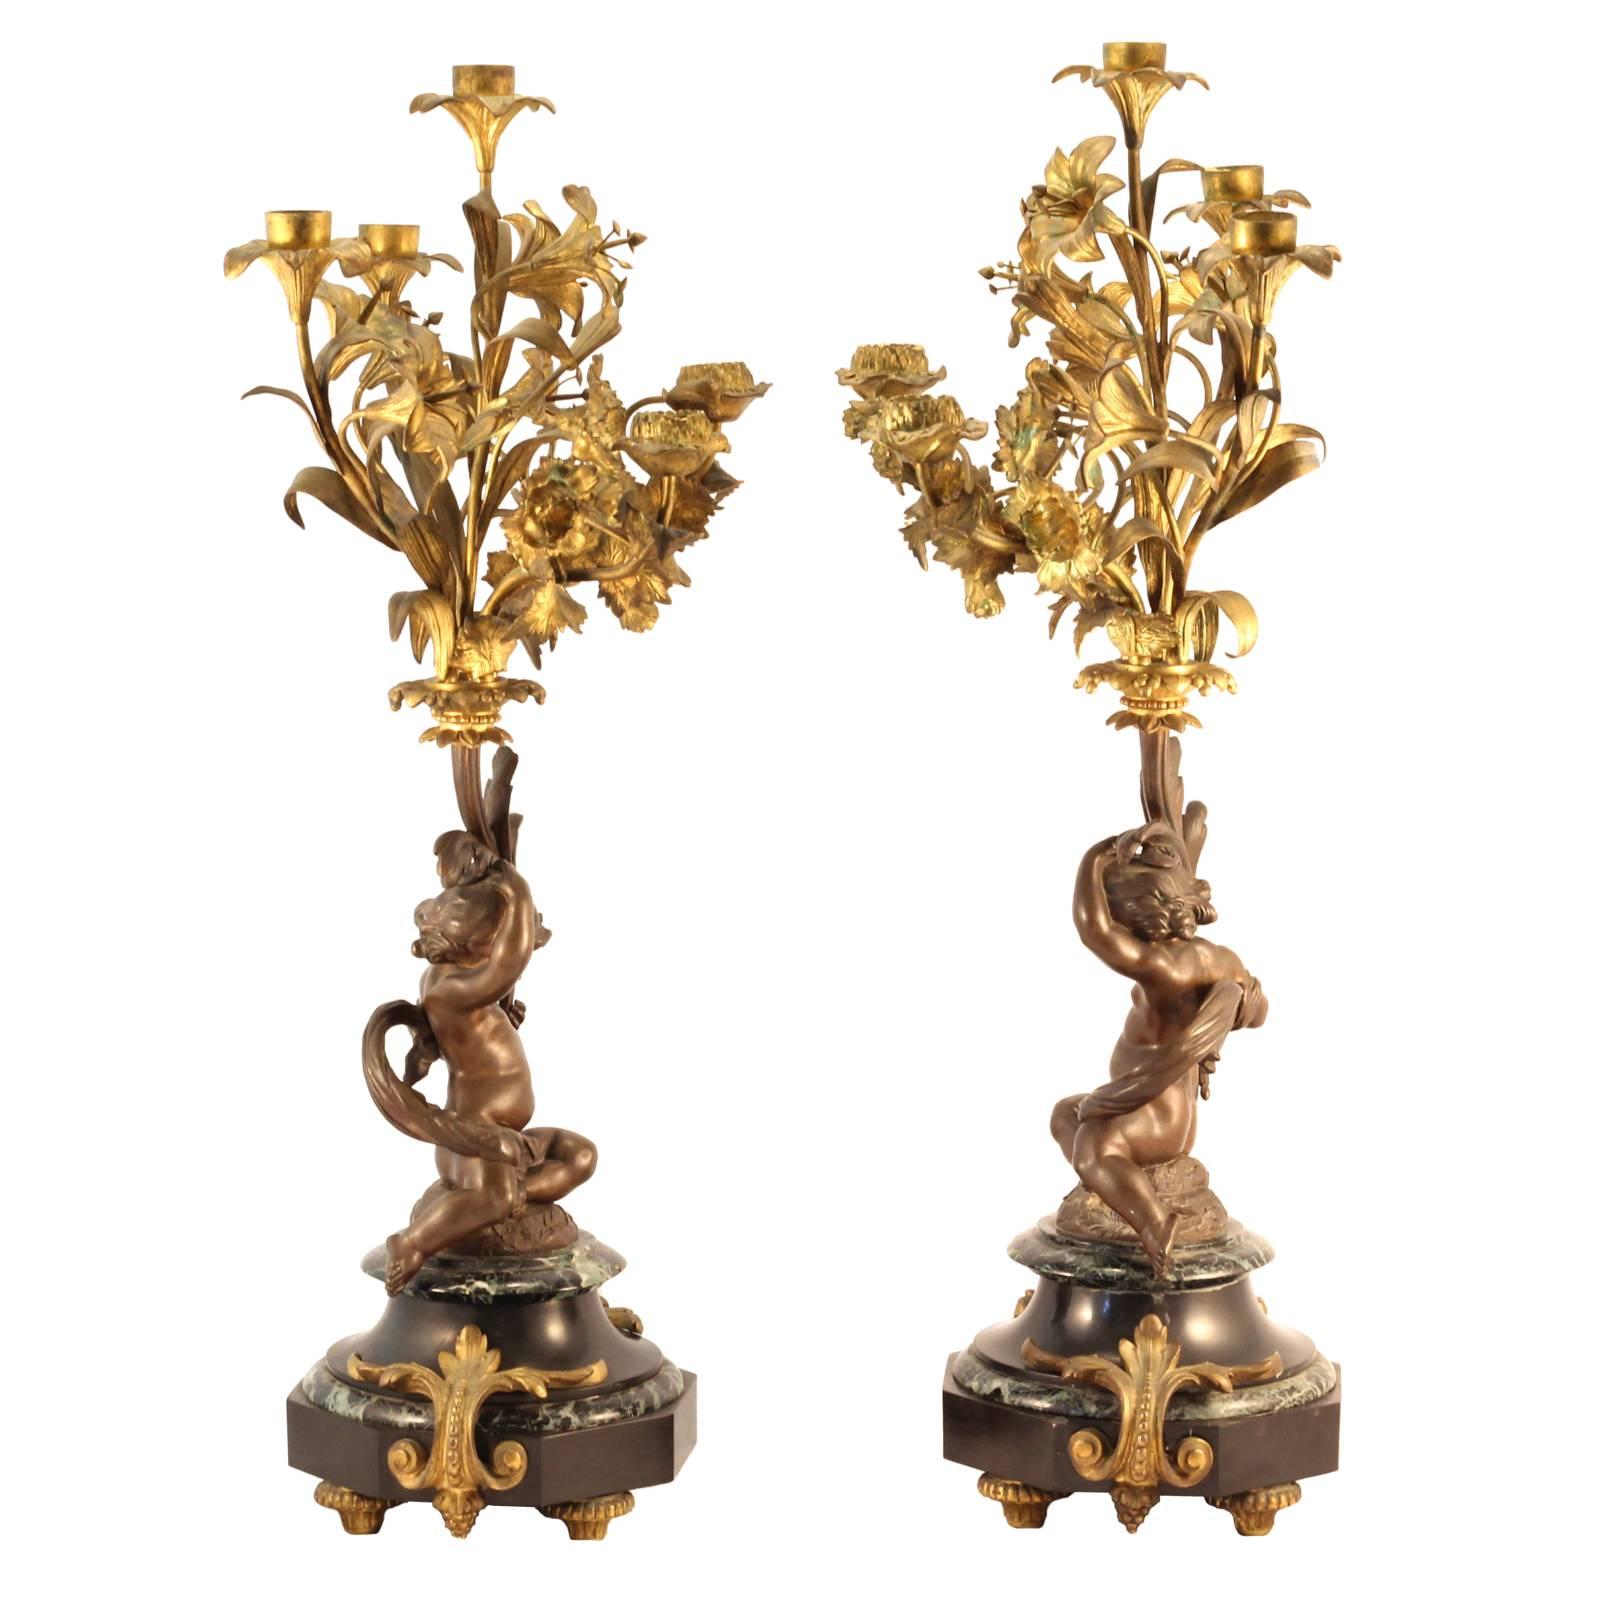 European Pair of 19th Century Louis XVI Style Gilt and Cast Bronze Putti Candelabra For Sale